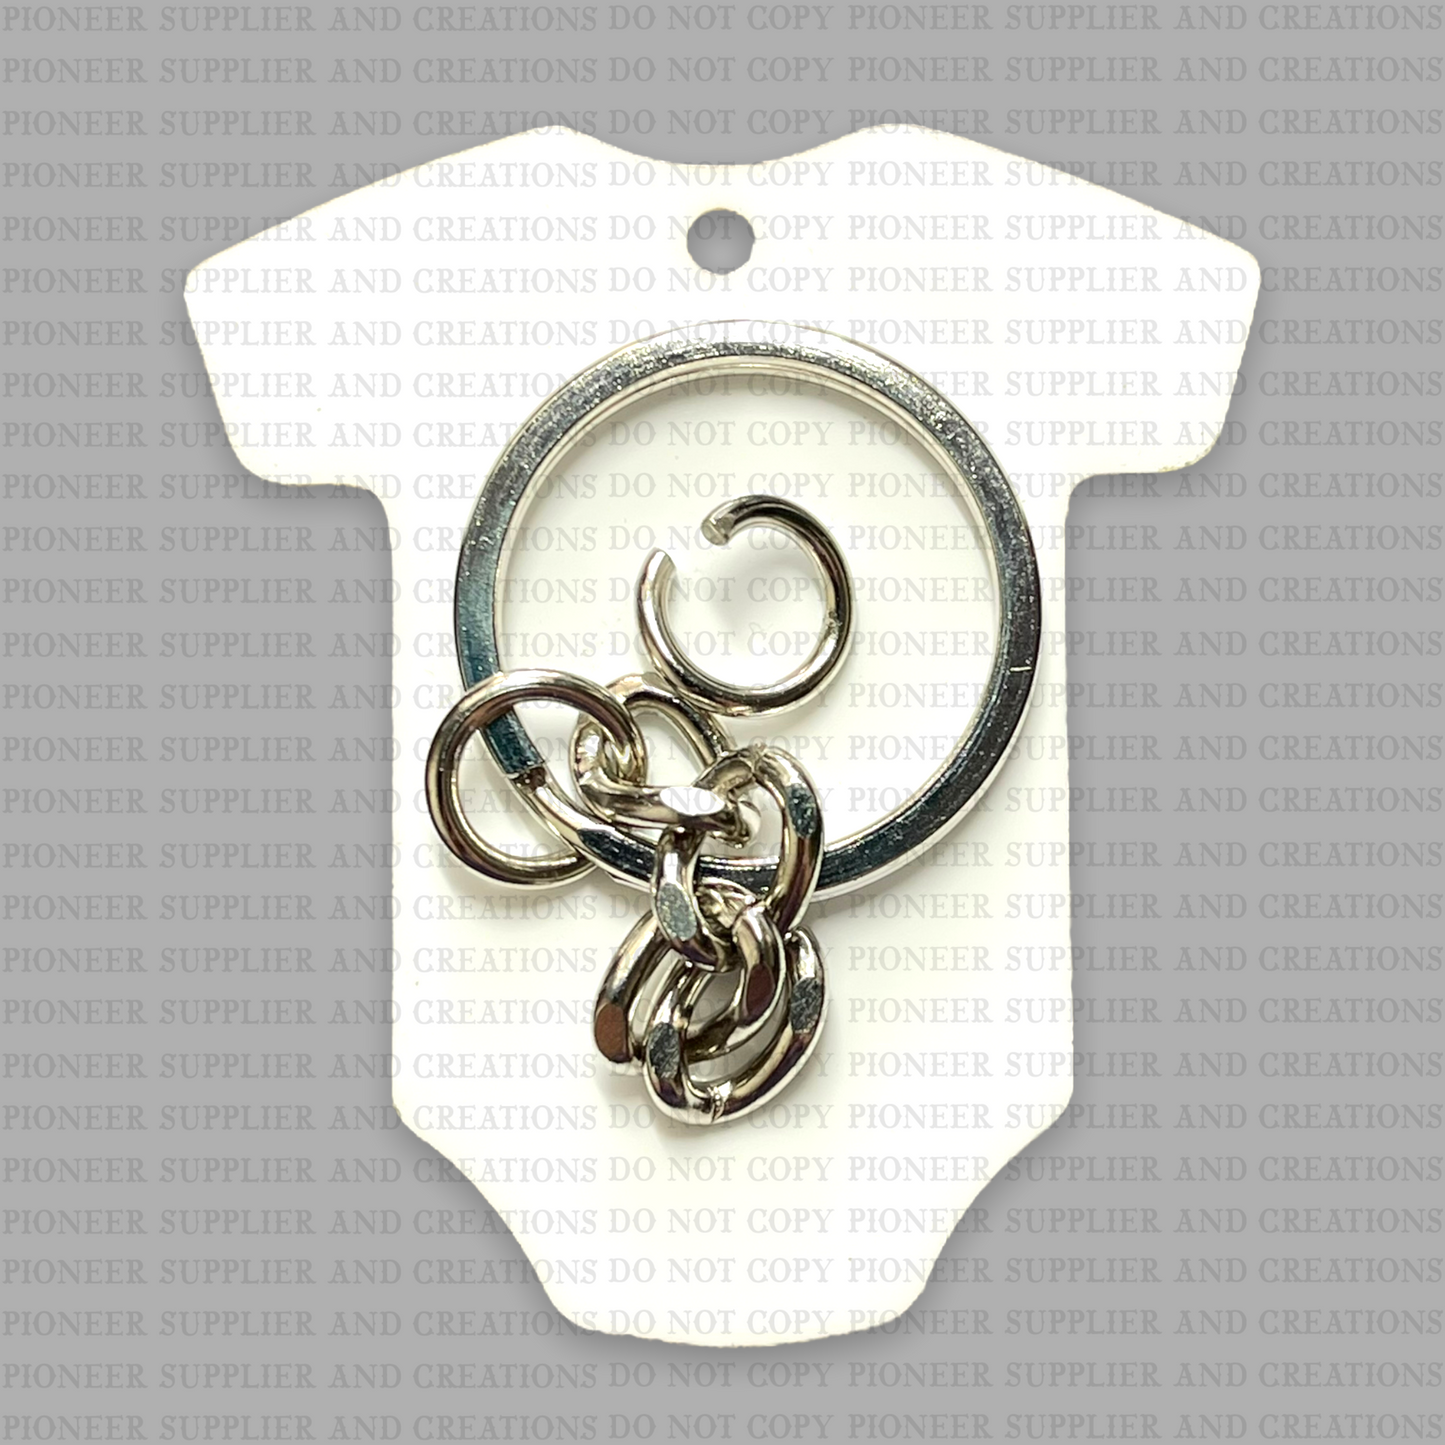 Baby Onesie Shaped Keychain Sublimation Blank - Pioneer Supplier & Creations